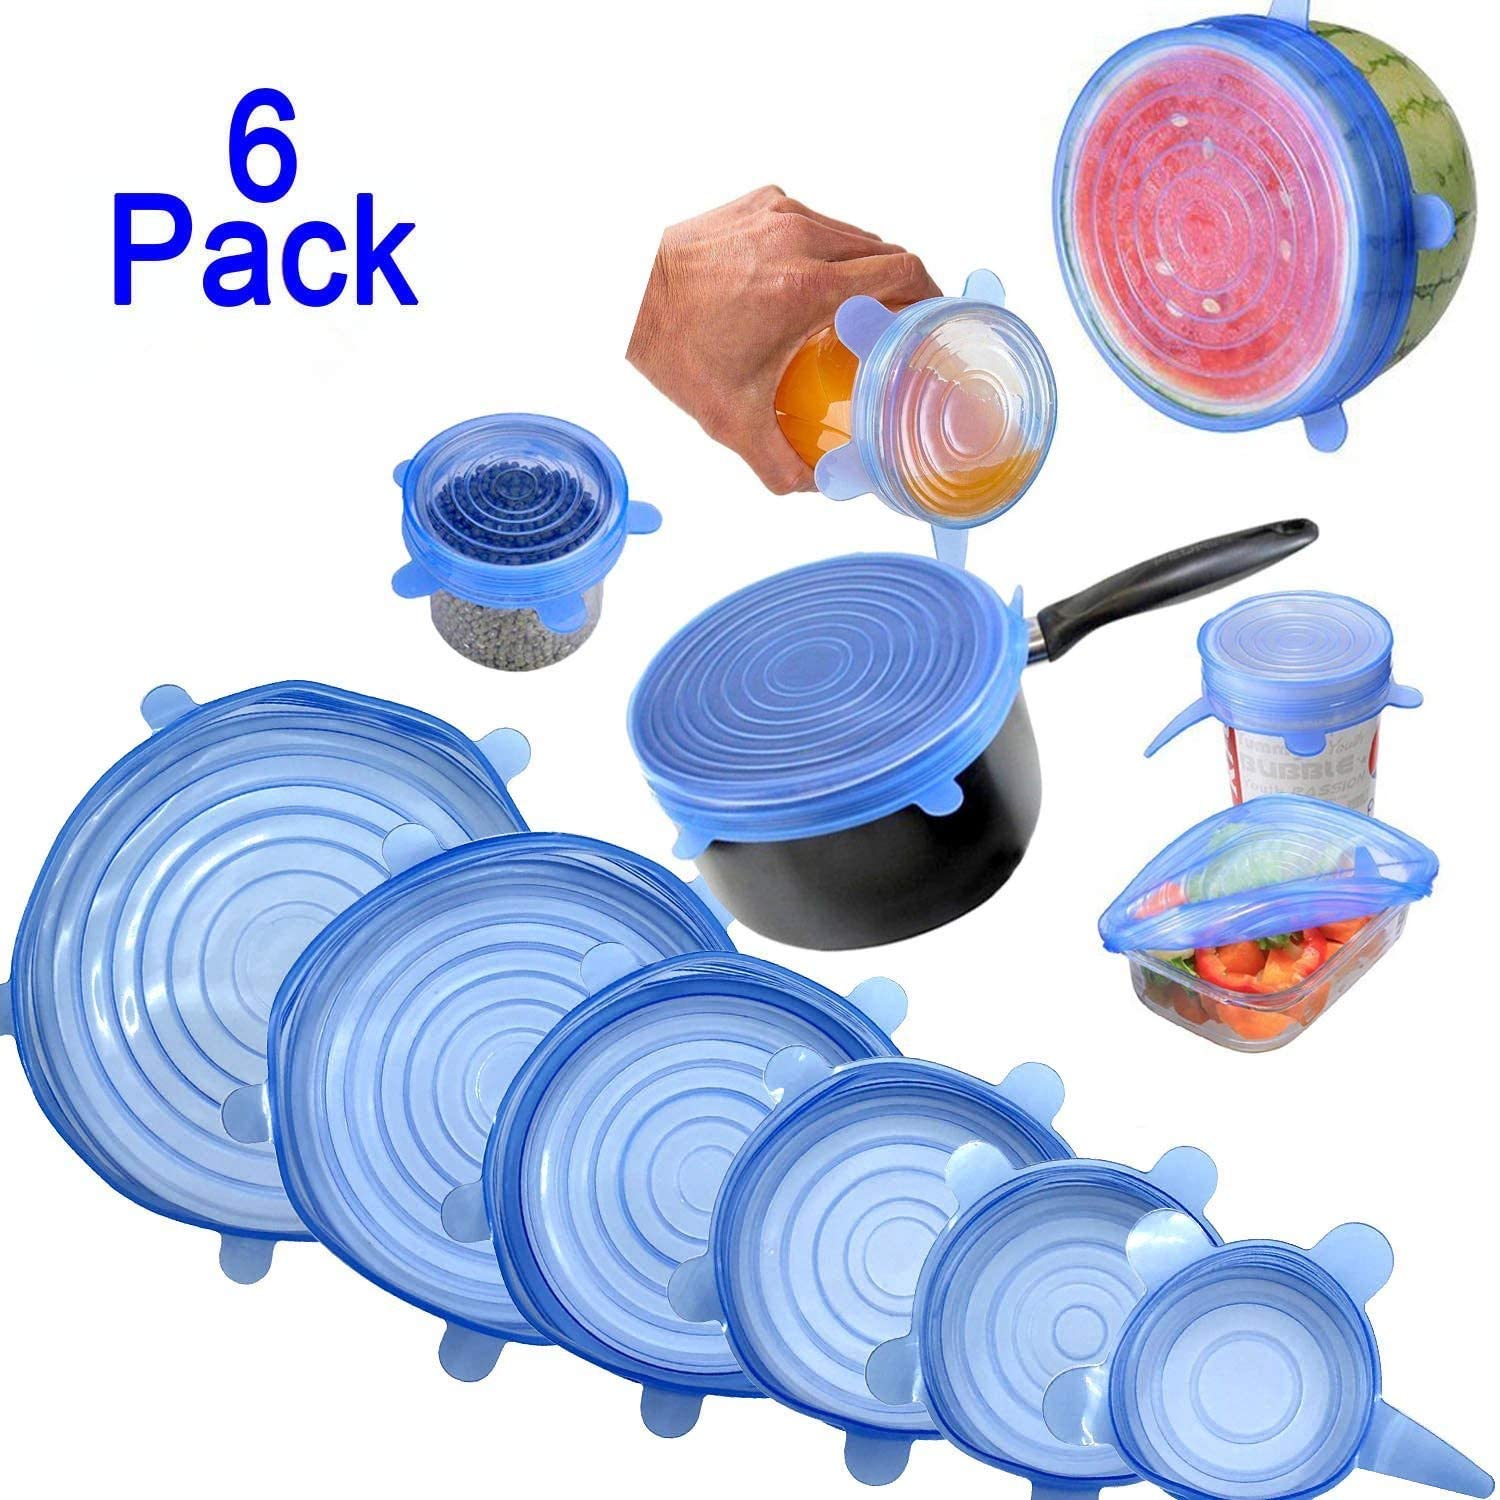 Pack of 6 Stretch Silicone Lids Kitchen Reusable Silicone Stretch Seal Lid for Food Preservation,